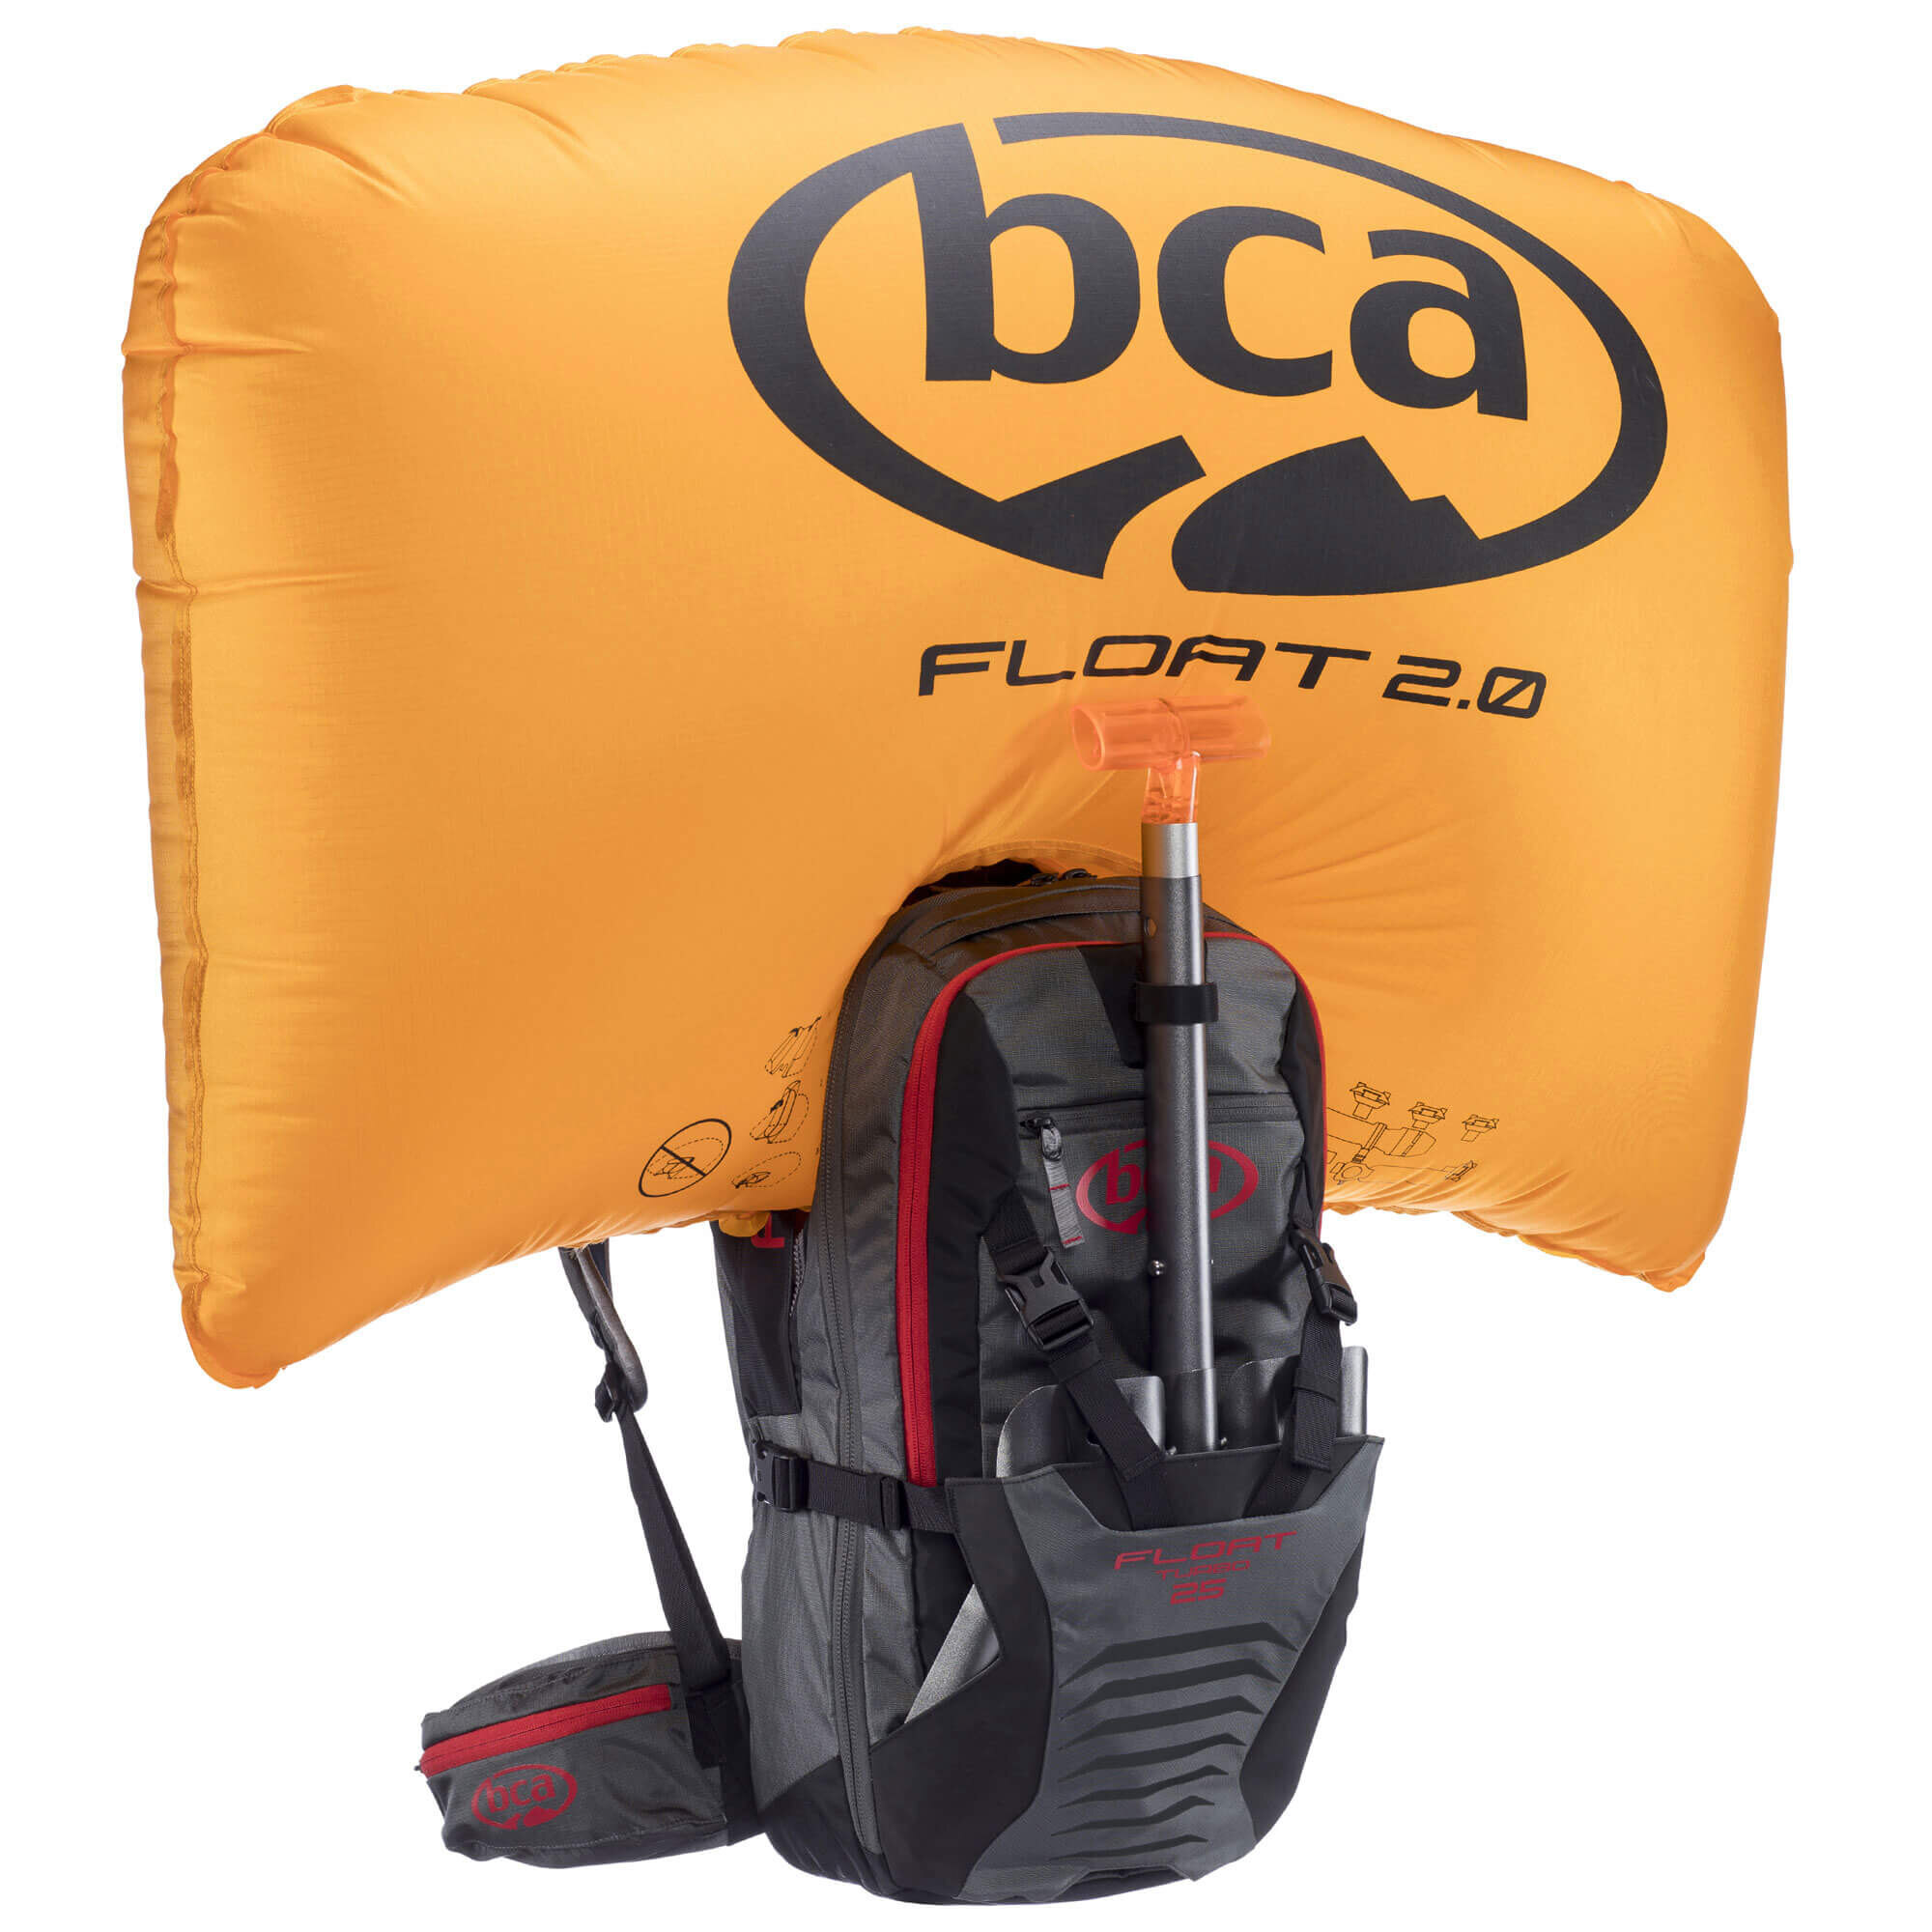 BCA Float 25 Turbo 2.0 Avalanche Airbag System